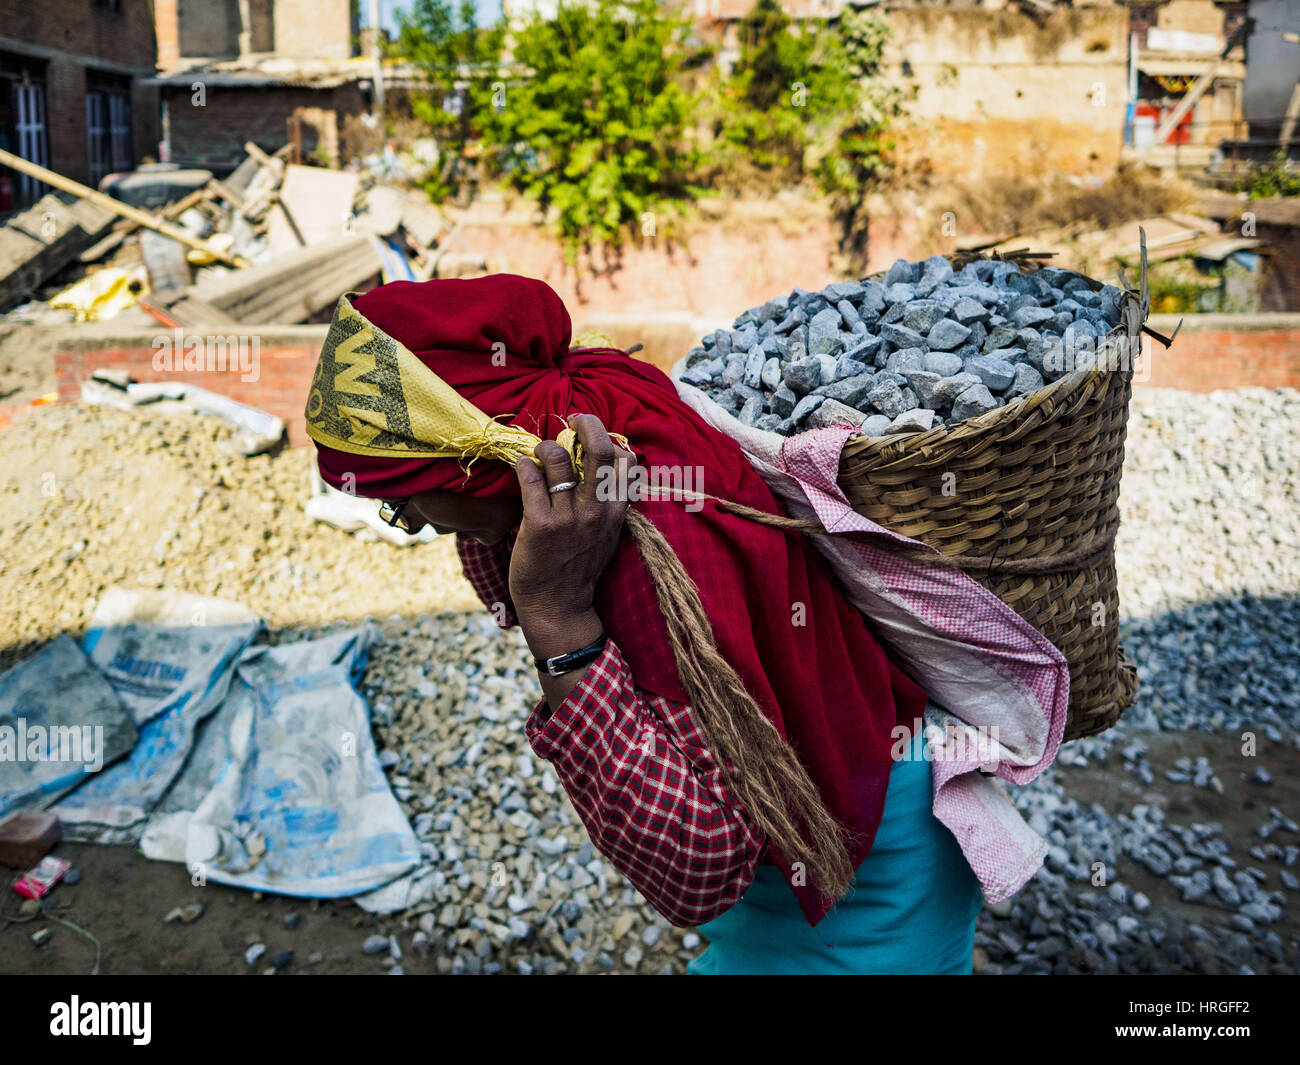 Sankhu, Central Development Region, Nepal. 2nd Mar, 2017. A laborer carries carry gravel to a home being rebuilt in Sankhu. Each basket weighs about 80 pounds. Almost all of the work is being done by hand. There is more construction and rebuilding going on in Sankhu, west of central Kathmandu, than in many other parts of the Kathmandu Valley nearly two years after the earthquake of 25 April 2015 that devastated Nepal. In some villages in the Kathmandu valley workers are working by hand to remove ruble and dig out destroyed buildings. About 9,000 people were killed and another 22,000 injured Stock Photo